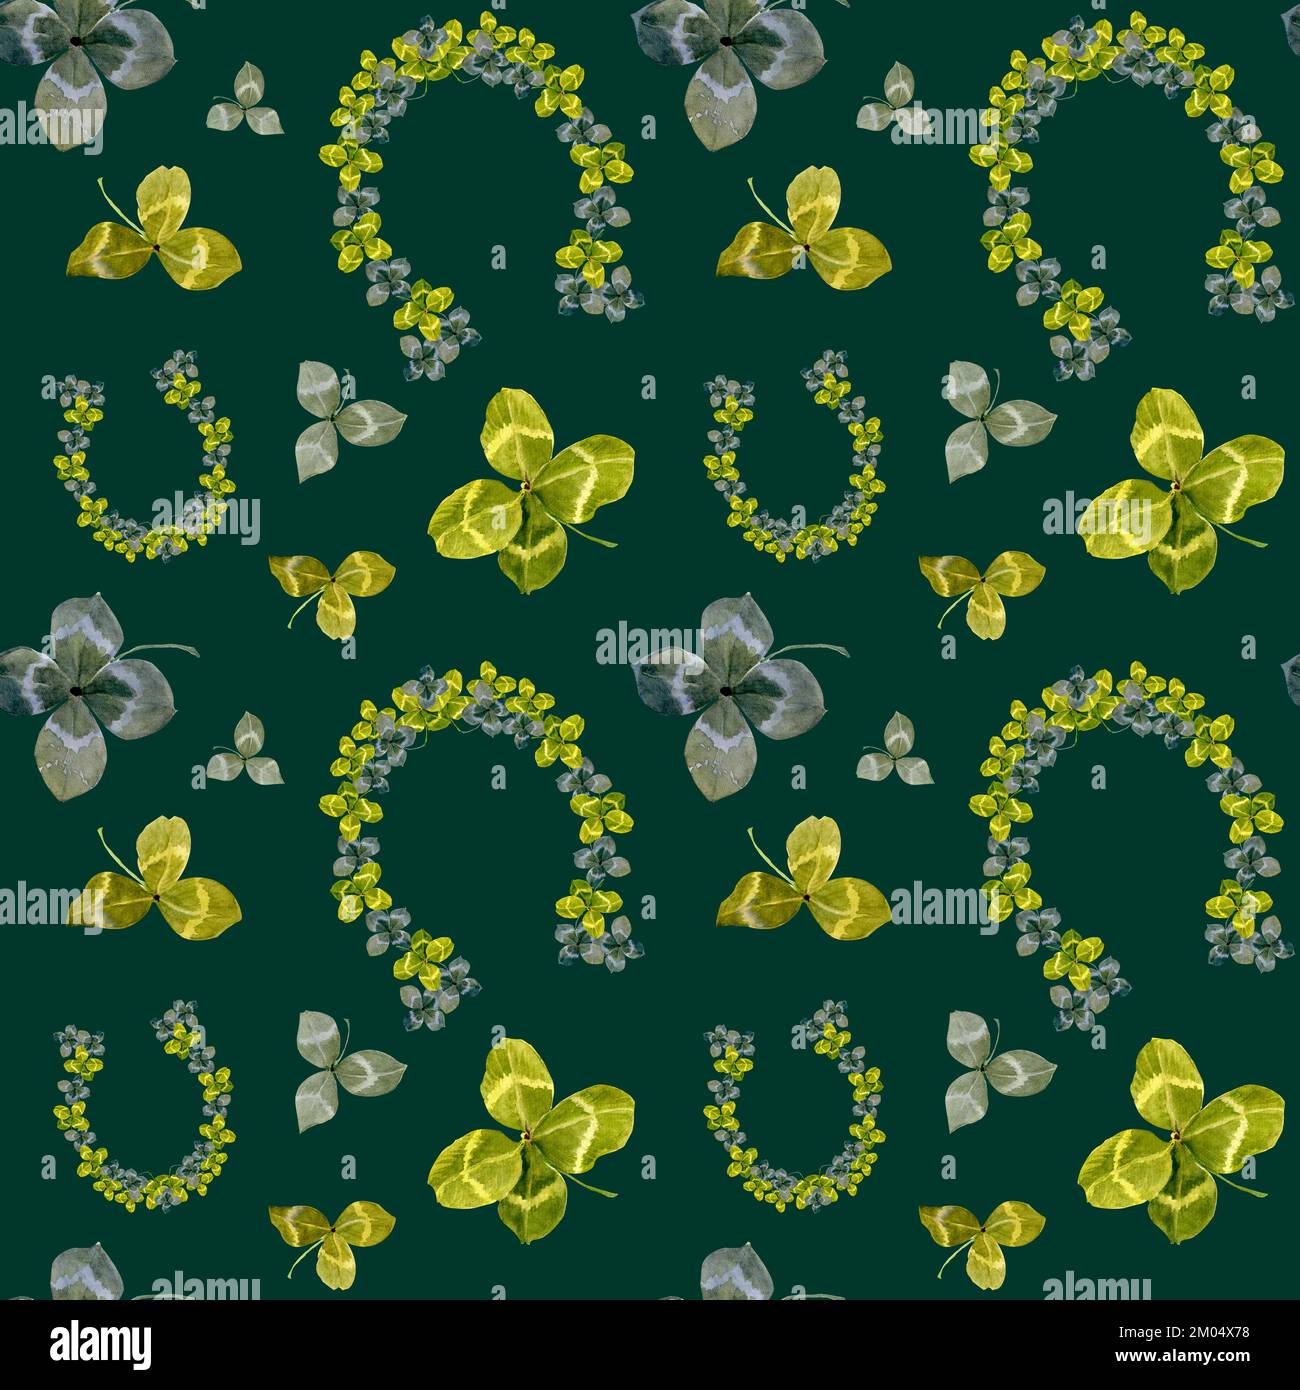 Watercolor seamless pattern, clover leaves horseshoe on dack green background. Hand draw leaves for St Patrick's day. Template for decorating designs Stock Photo